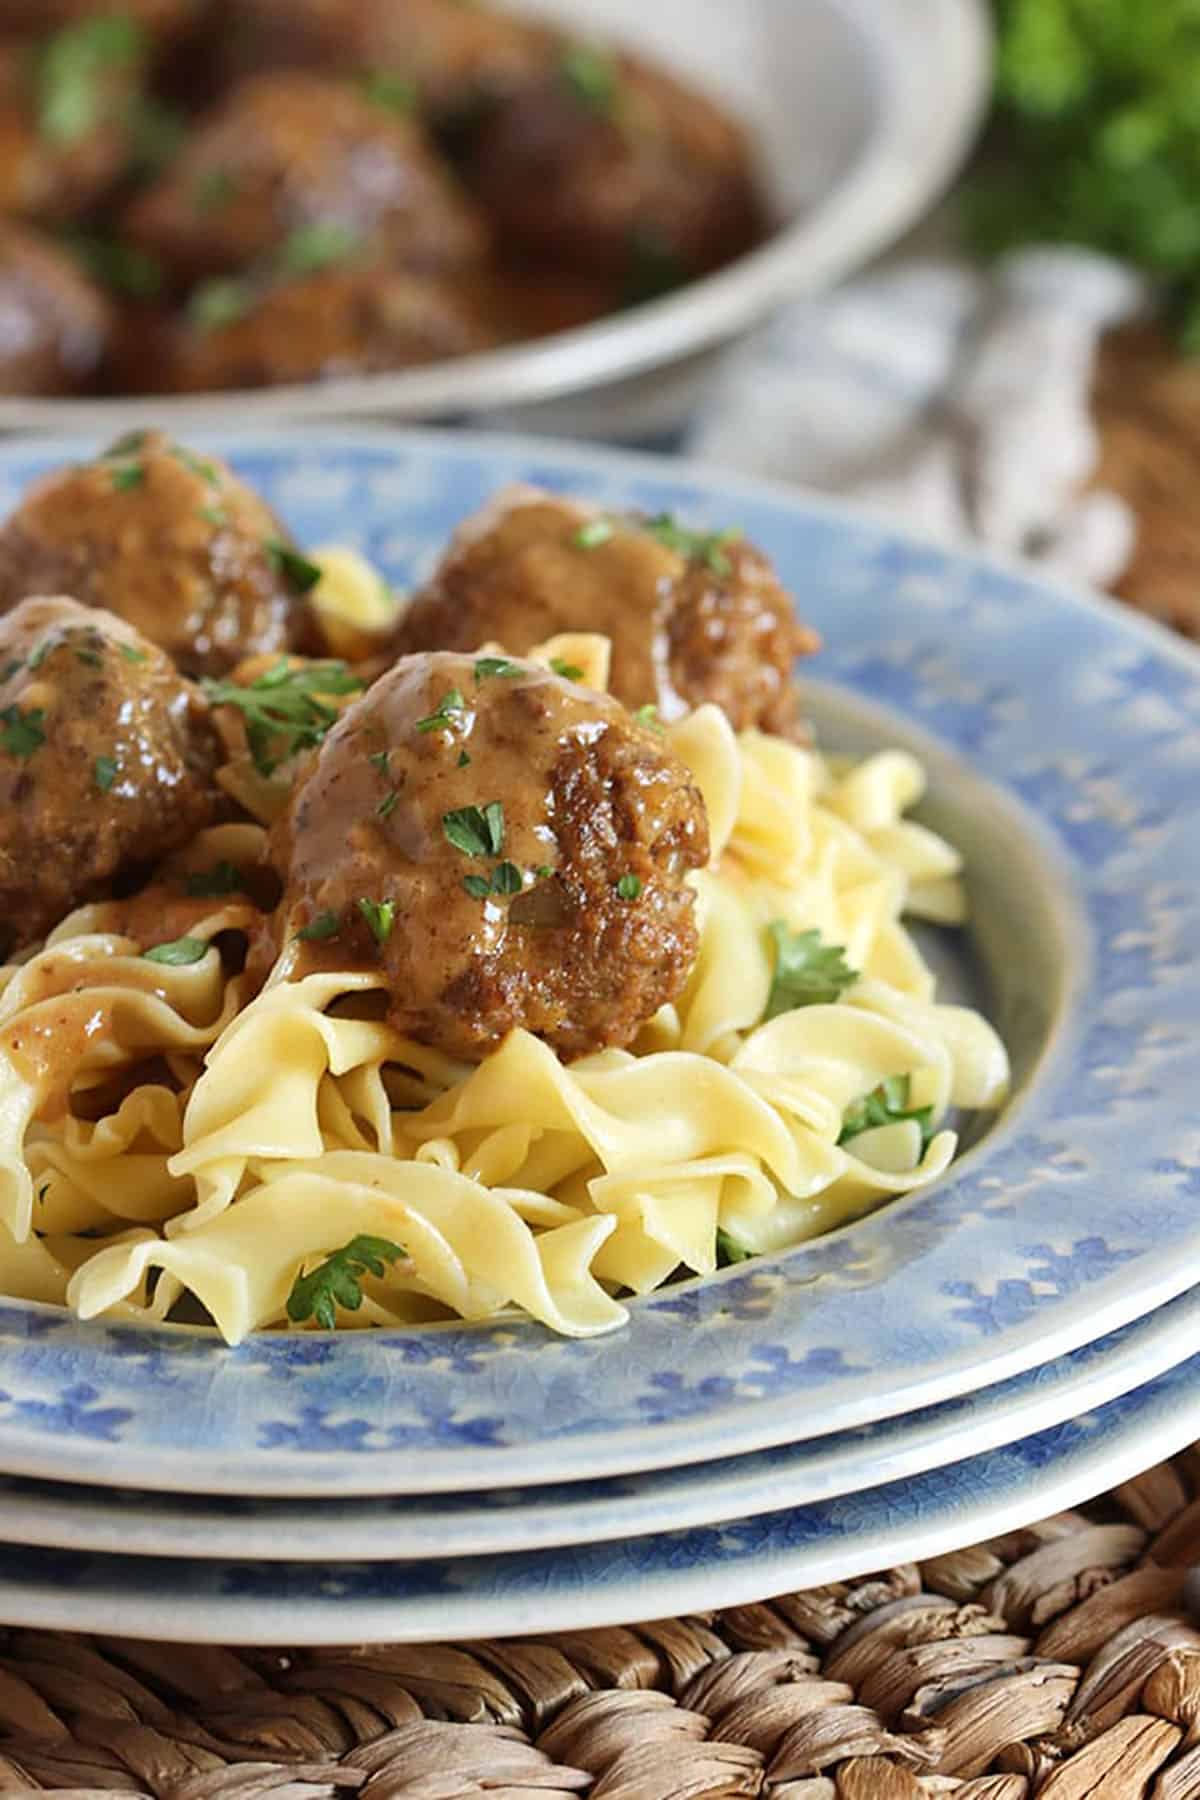 Swedish Meatballs on egg noodles plated on a blue plate set upon a wicker placemat